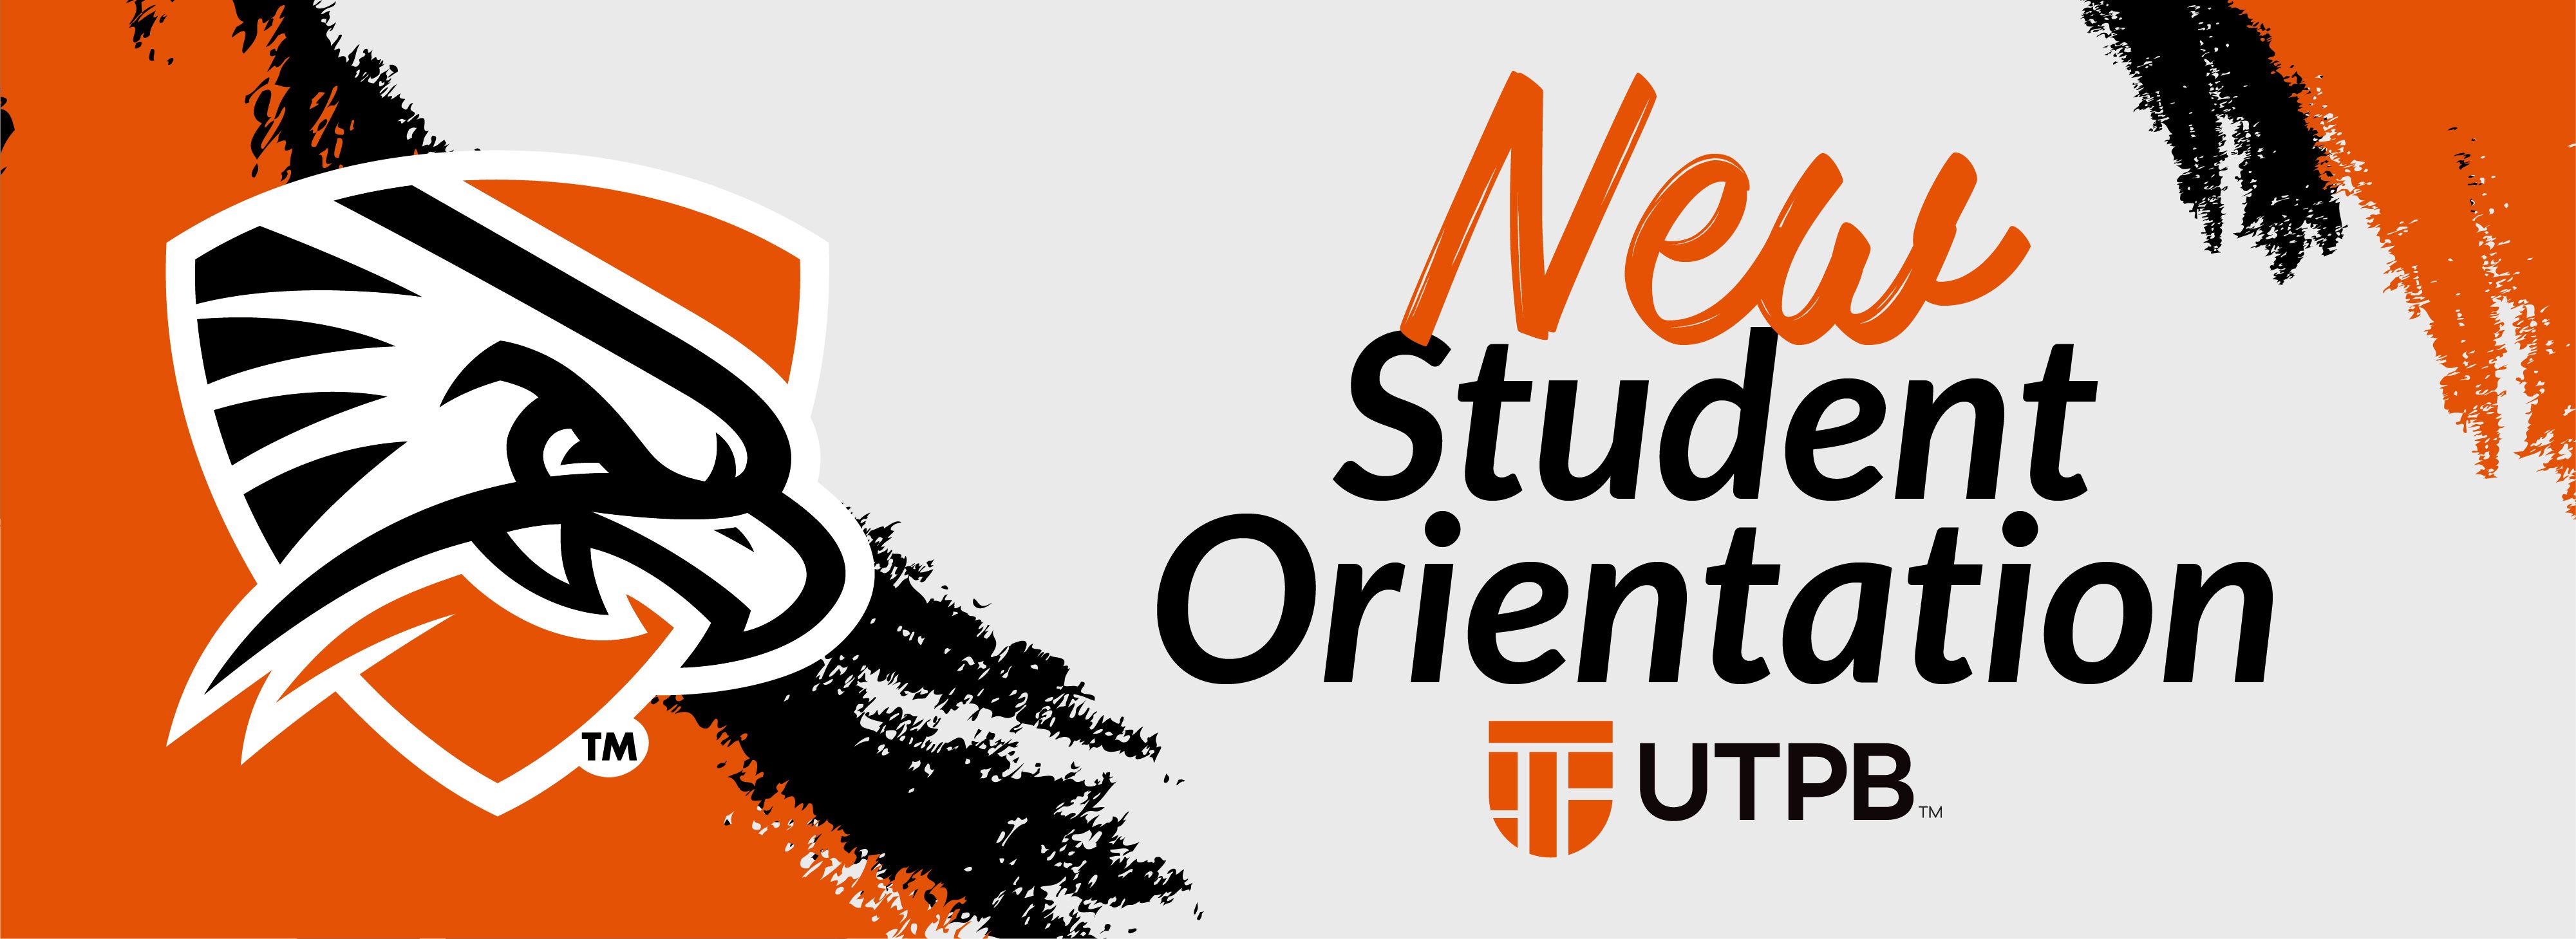 New Student Orientation Banner with Falcon Shield